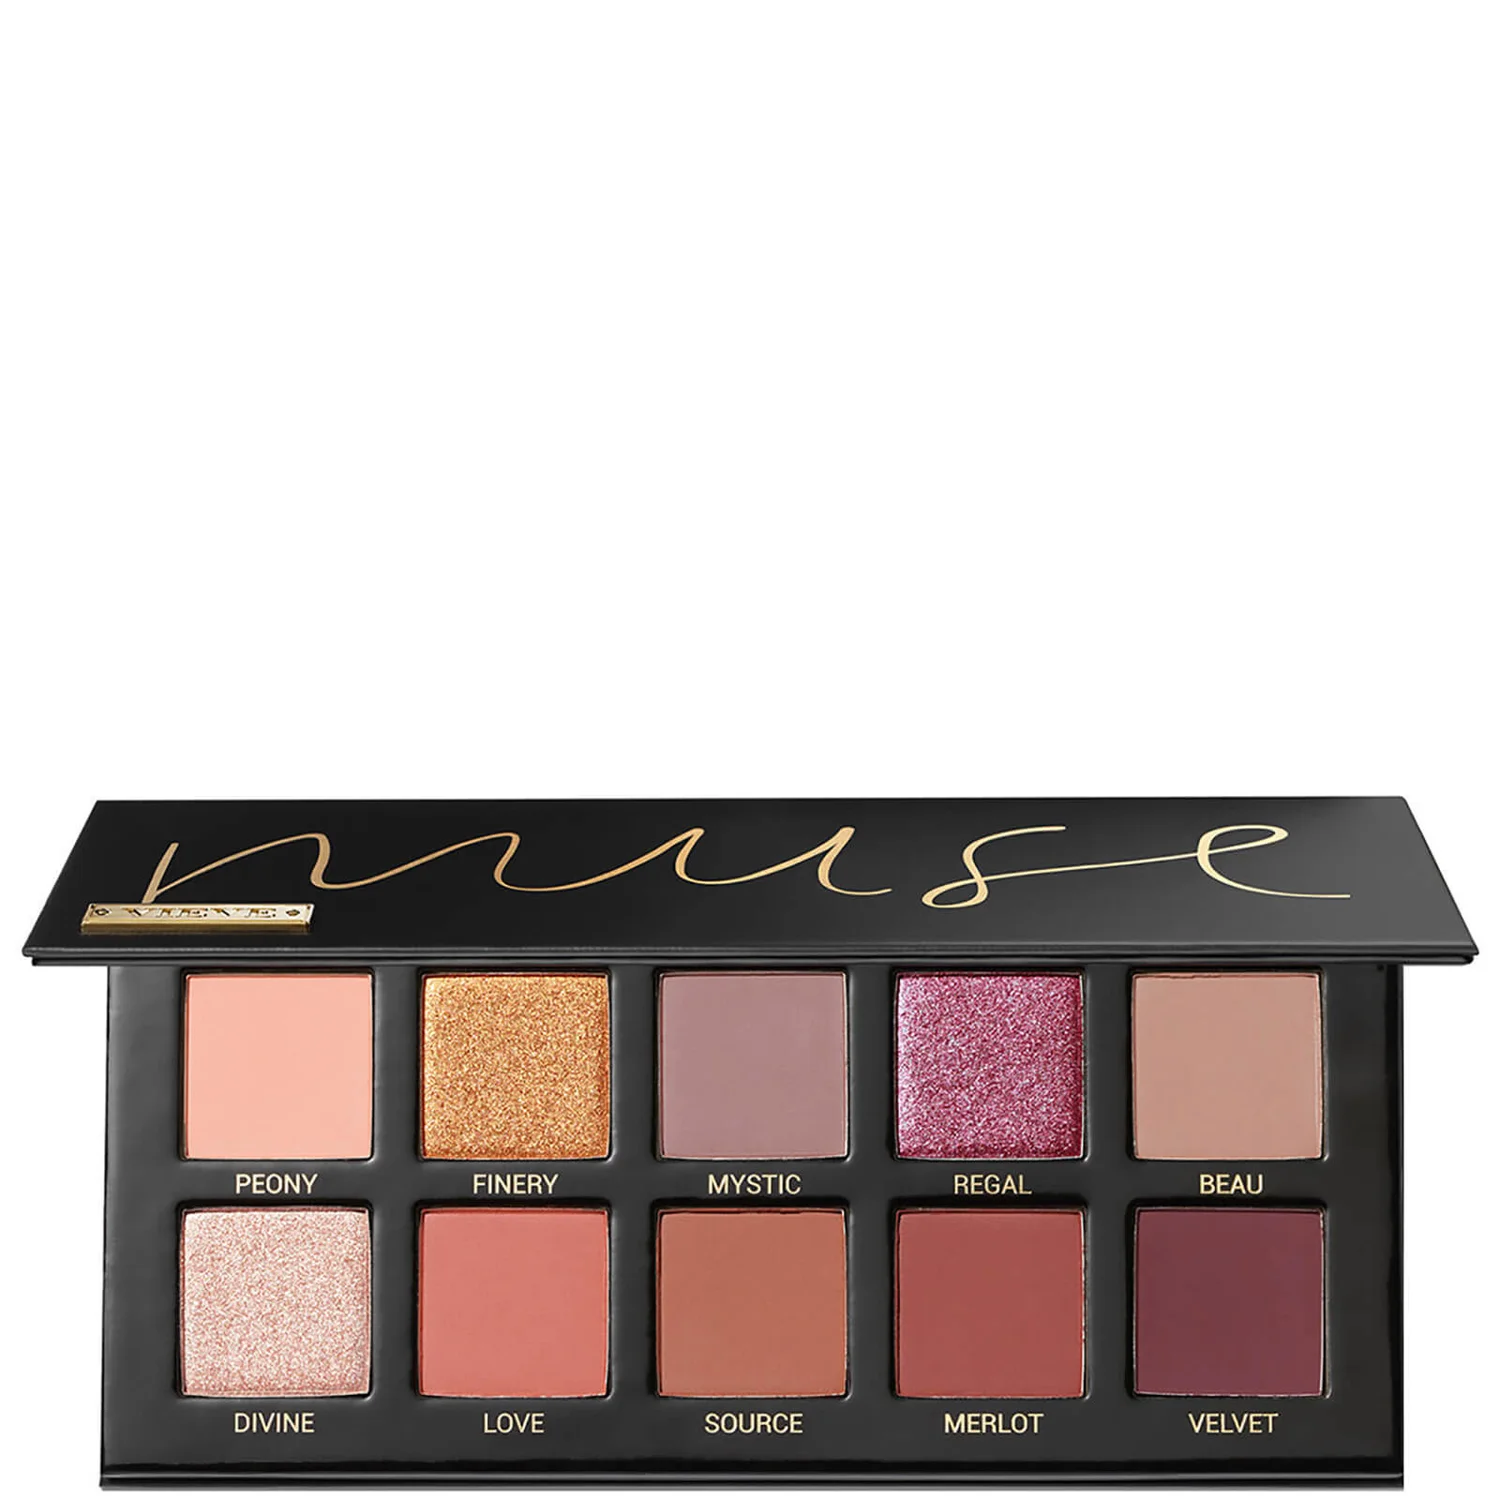 cultbeauty.co.uk | VIEVE THE MUSE EYESHADOW PALETTE